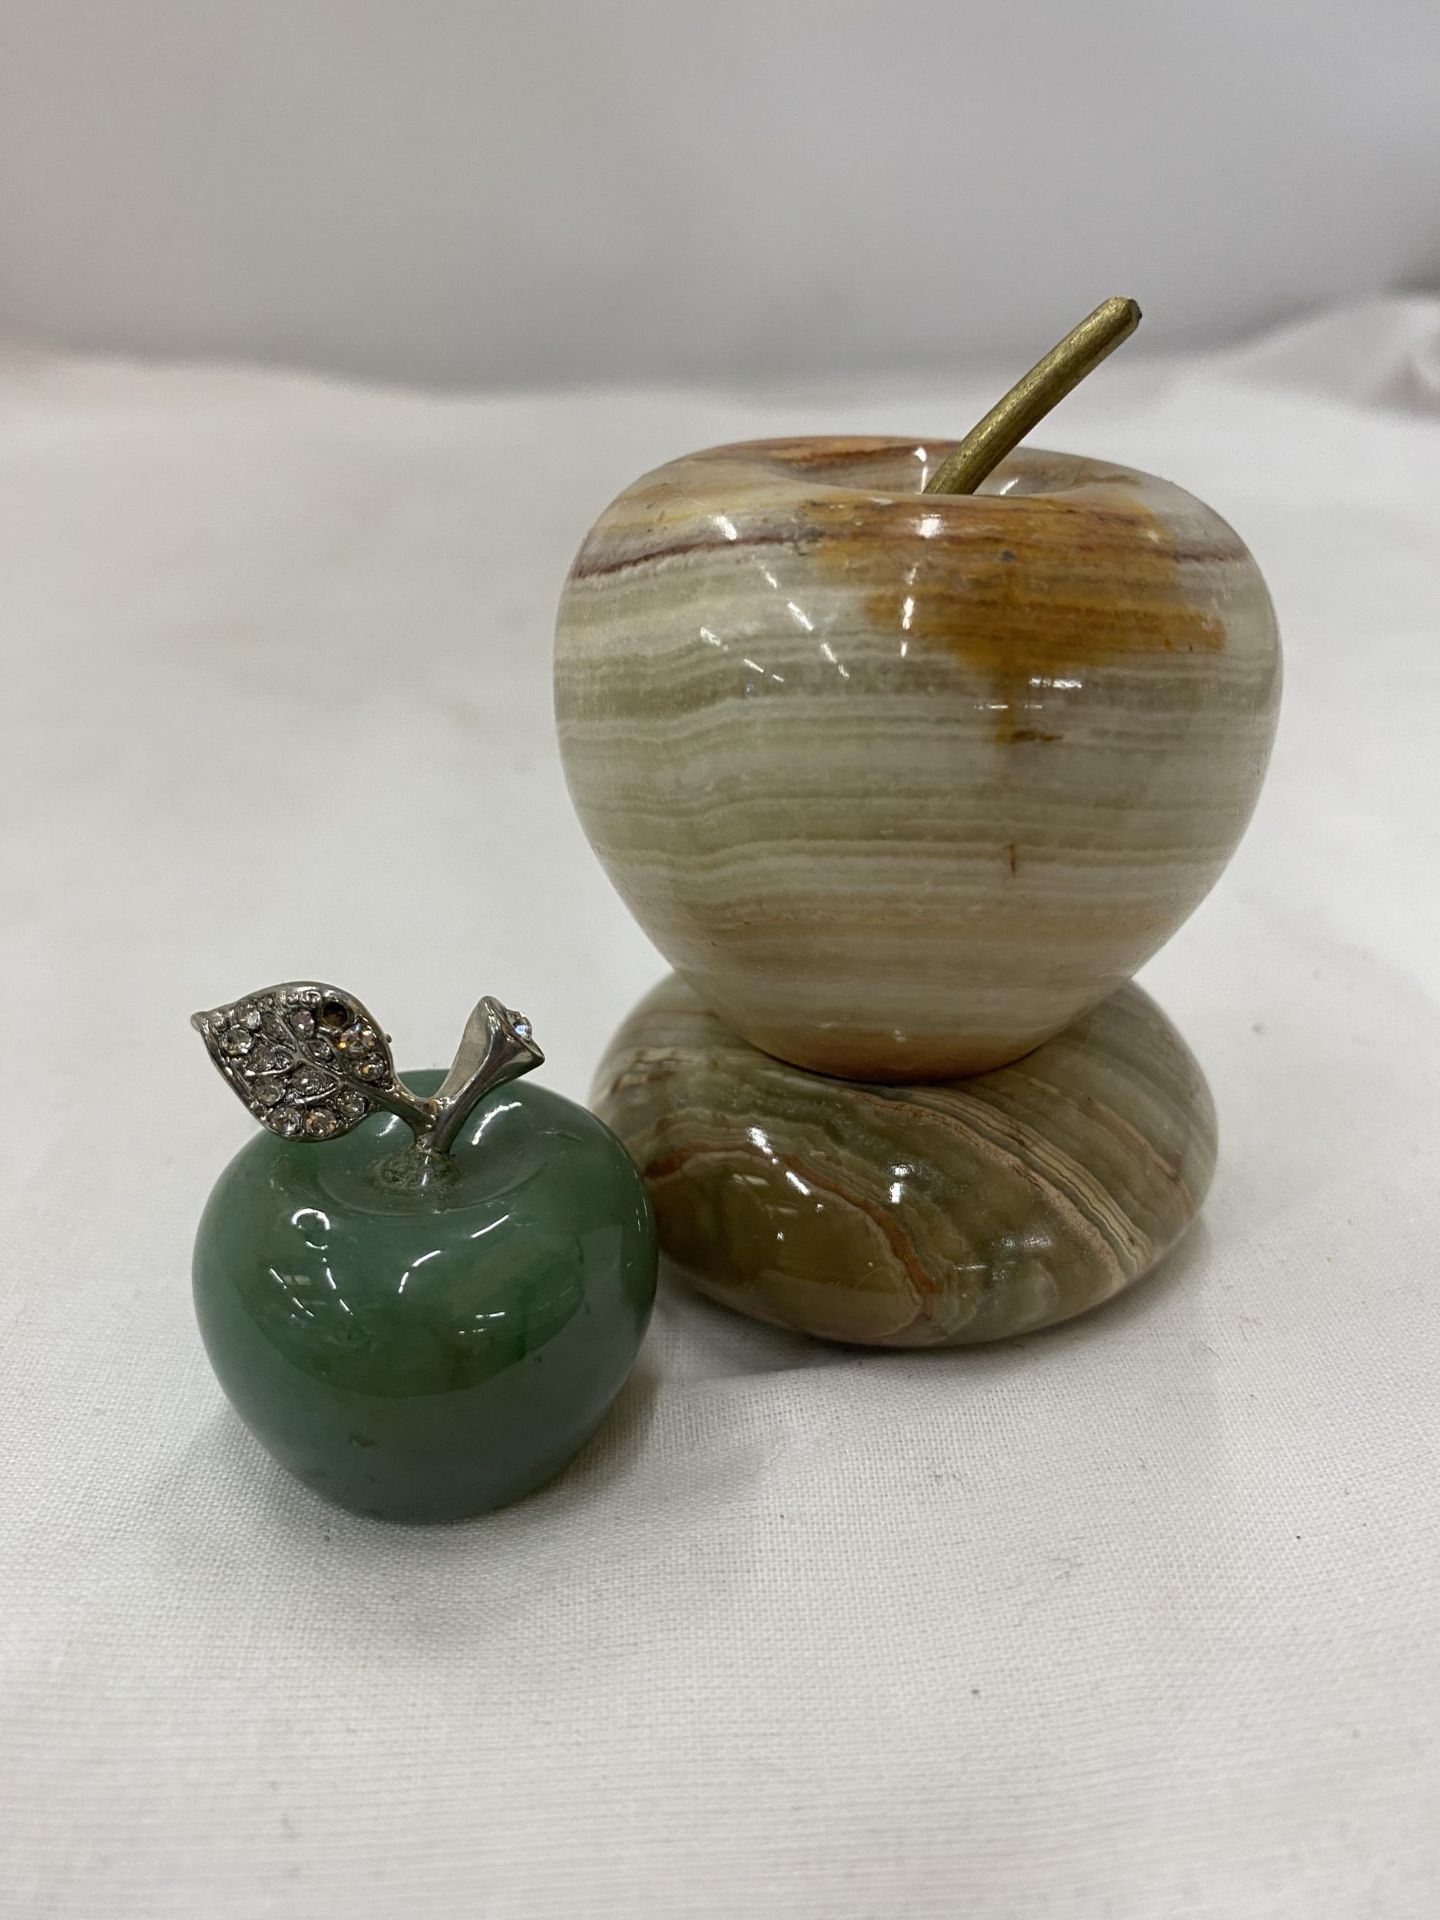 TWO NATURAL ONYX STONE APPLES - Image 3 of 3